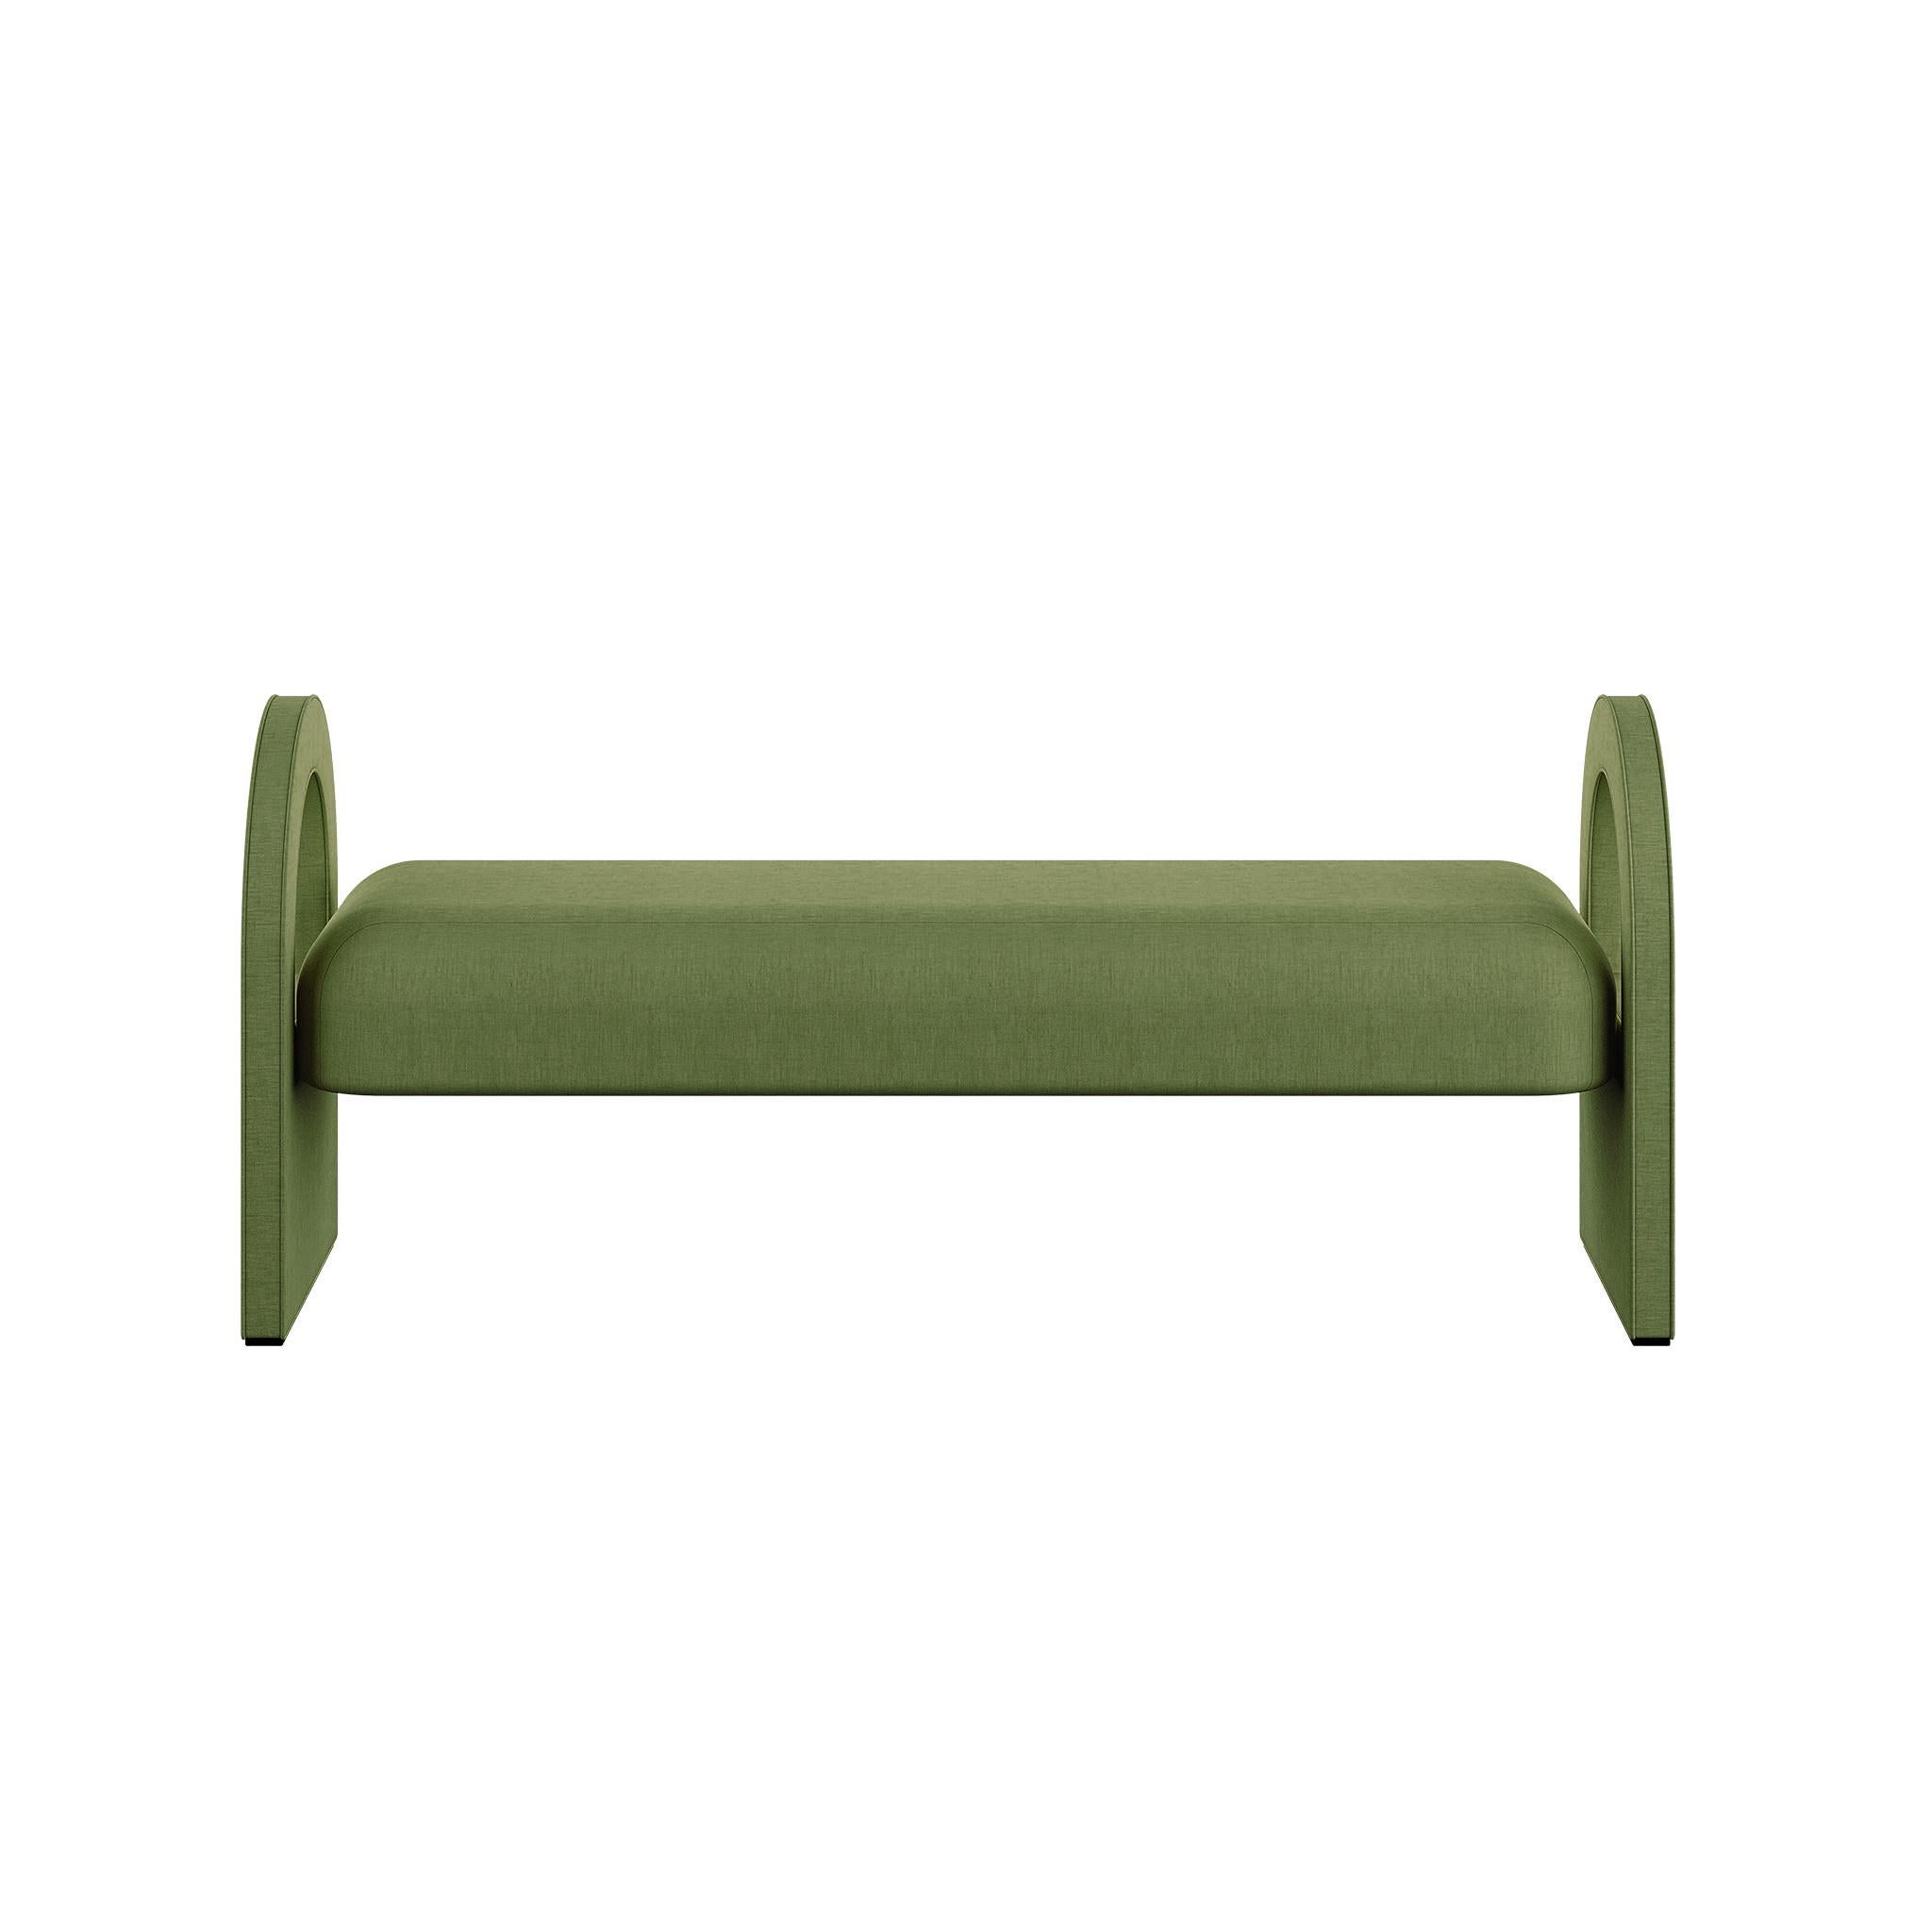 An upholstered contemporary green bench , in neutral colors, fitting any kind of interiors. 

Introducing our Contemporary Upholstered Bench, a versatile and stylish piece that seamlessly blends into various interior styles, from the most